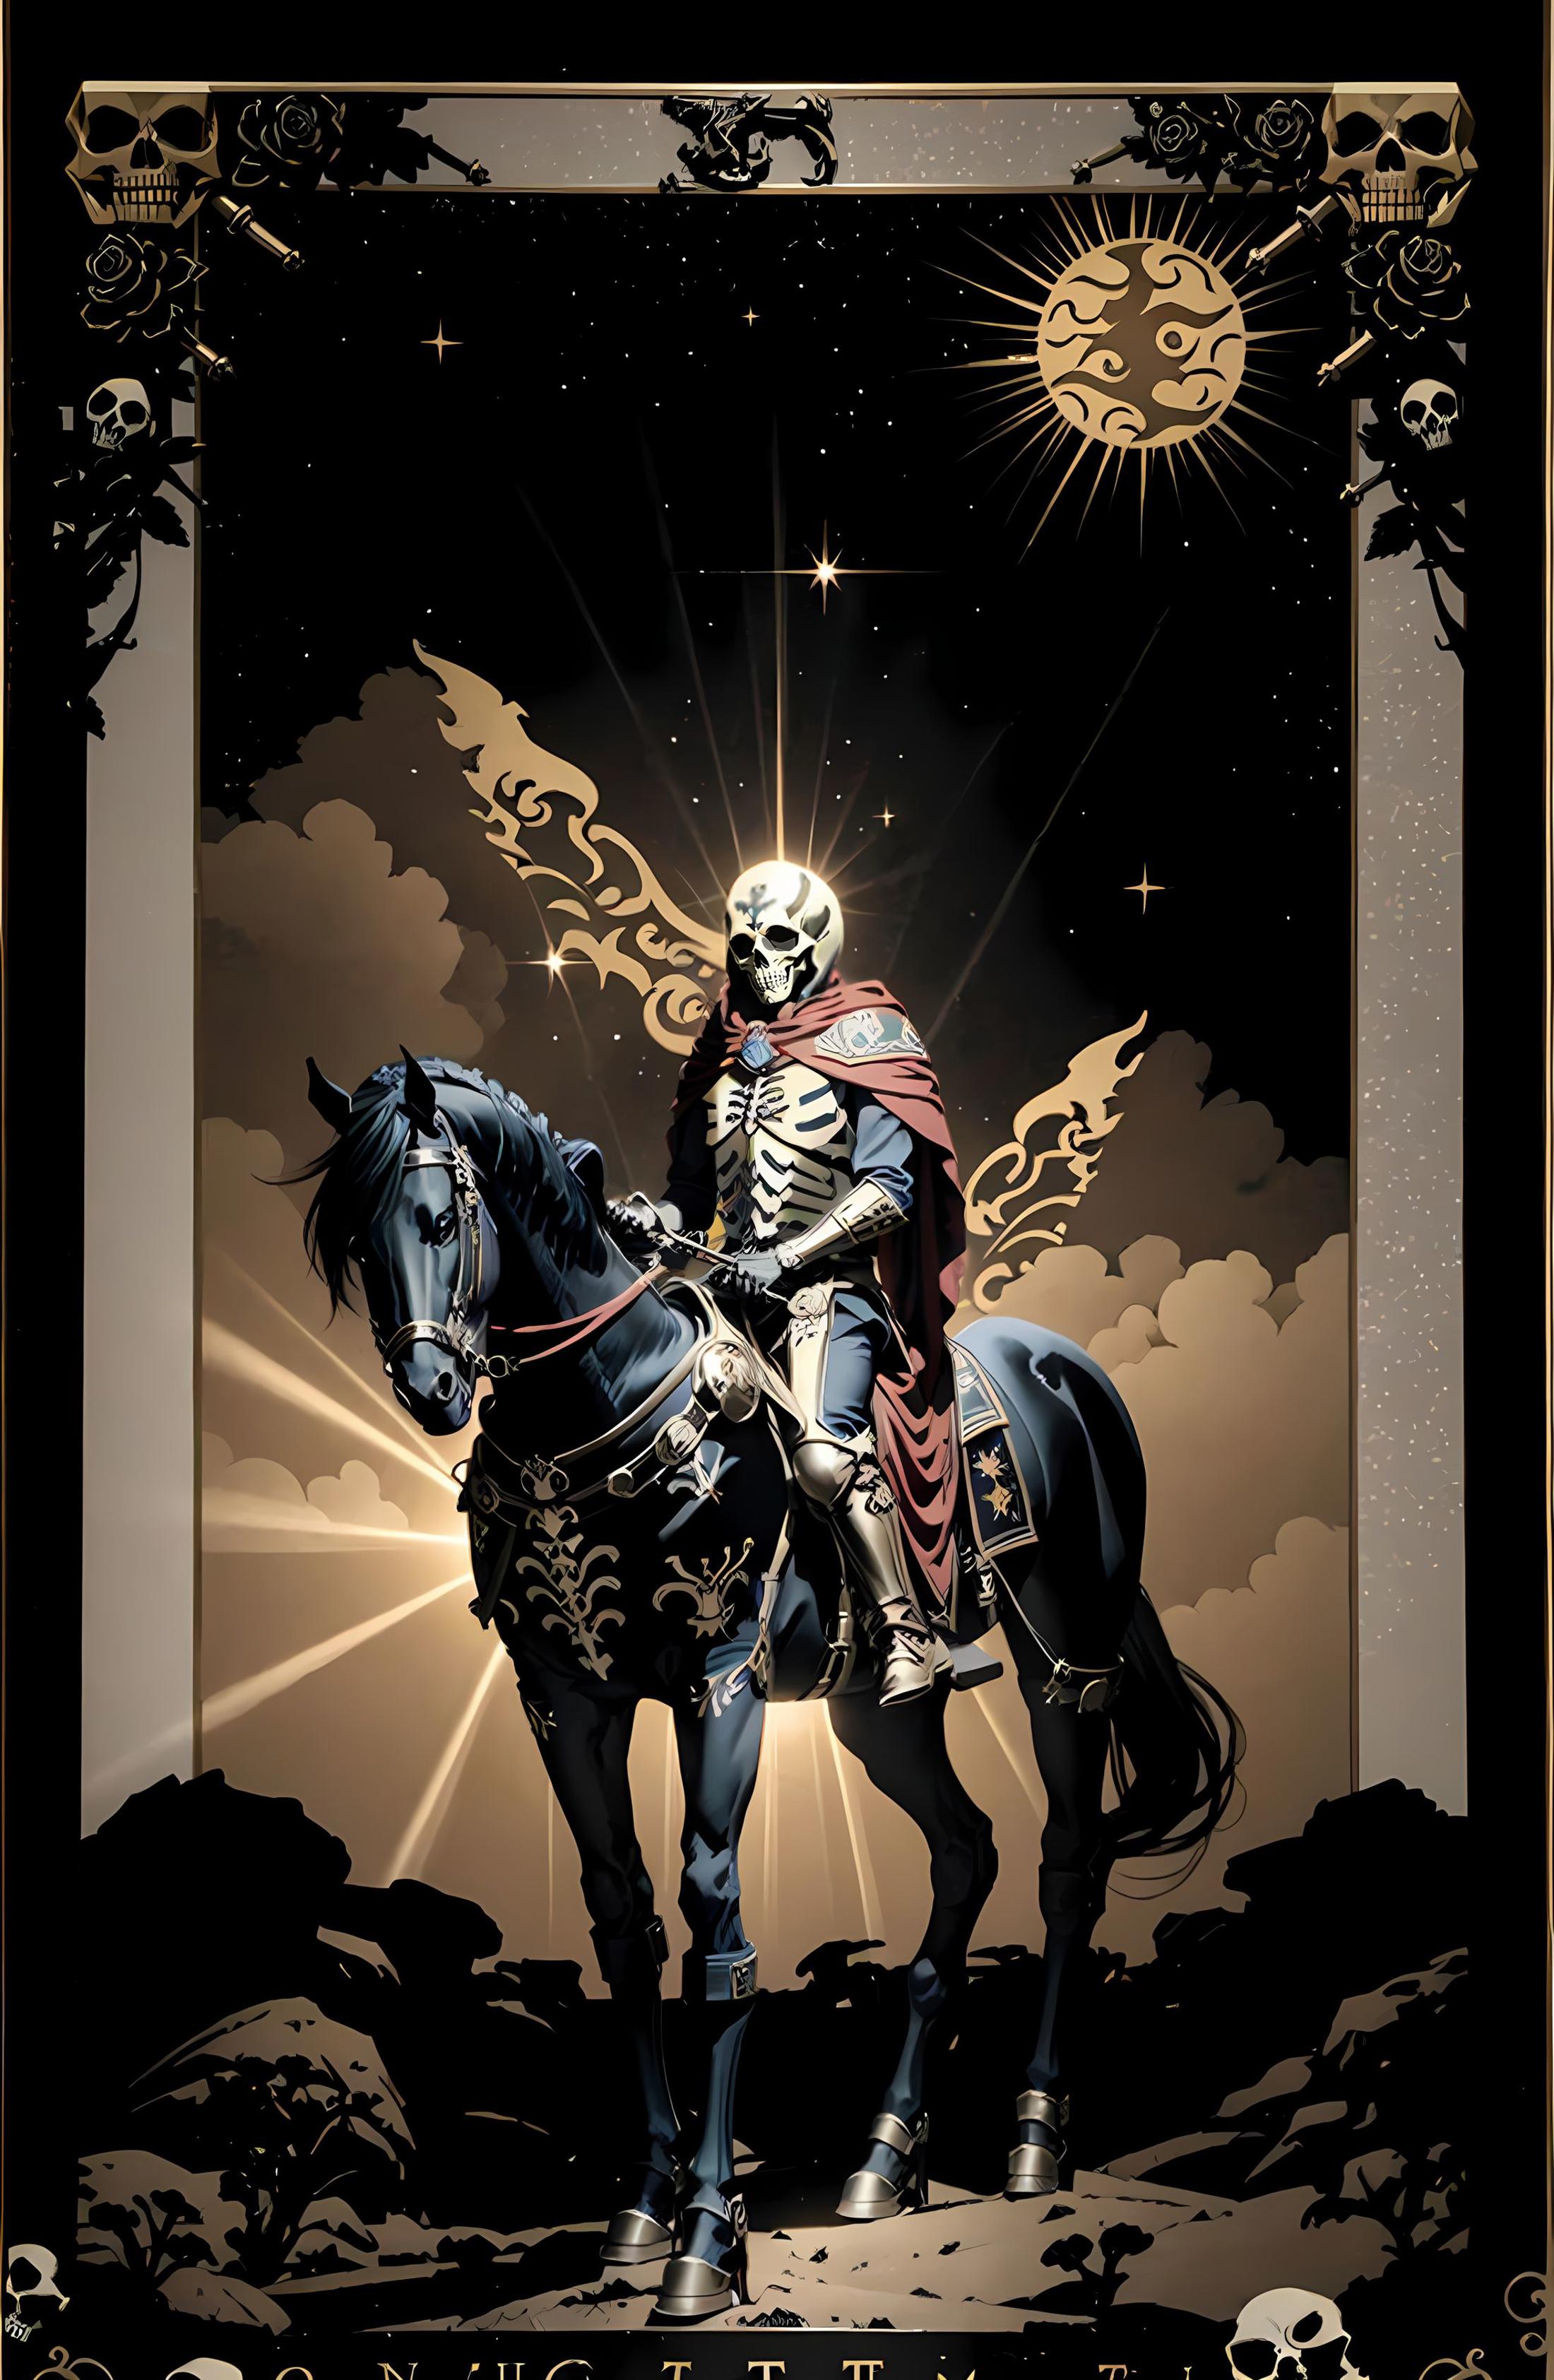 Tarot Cards (Rider-Waite) image by donnyraves